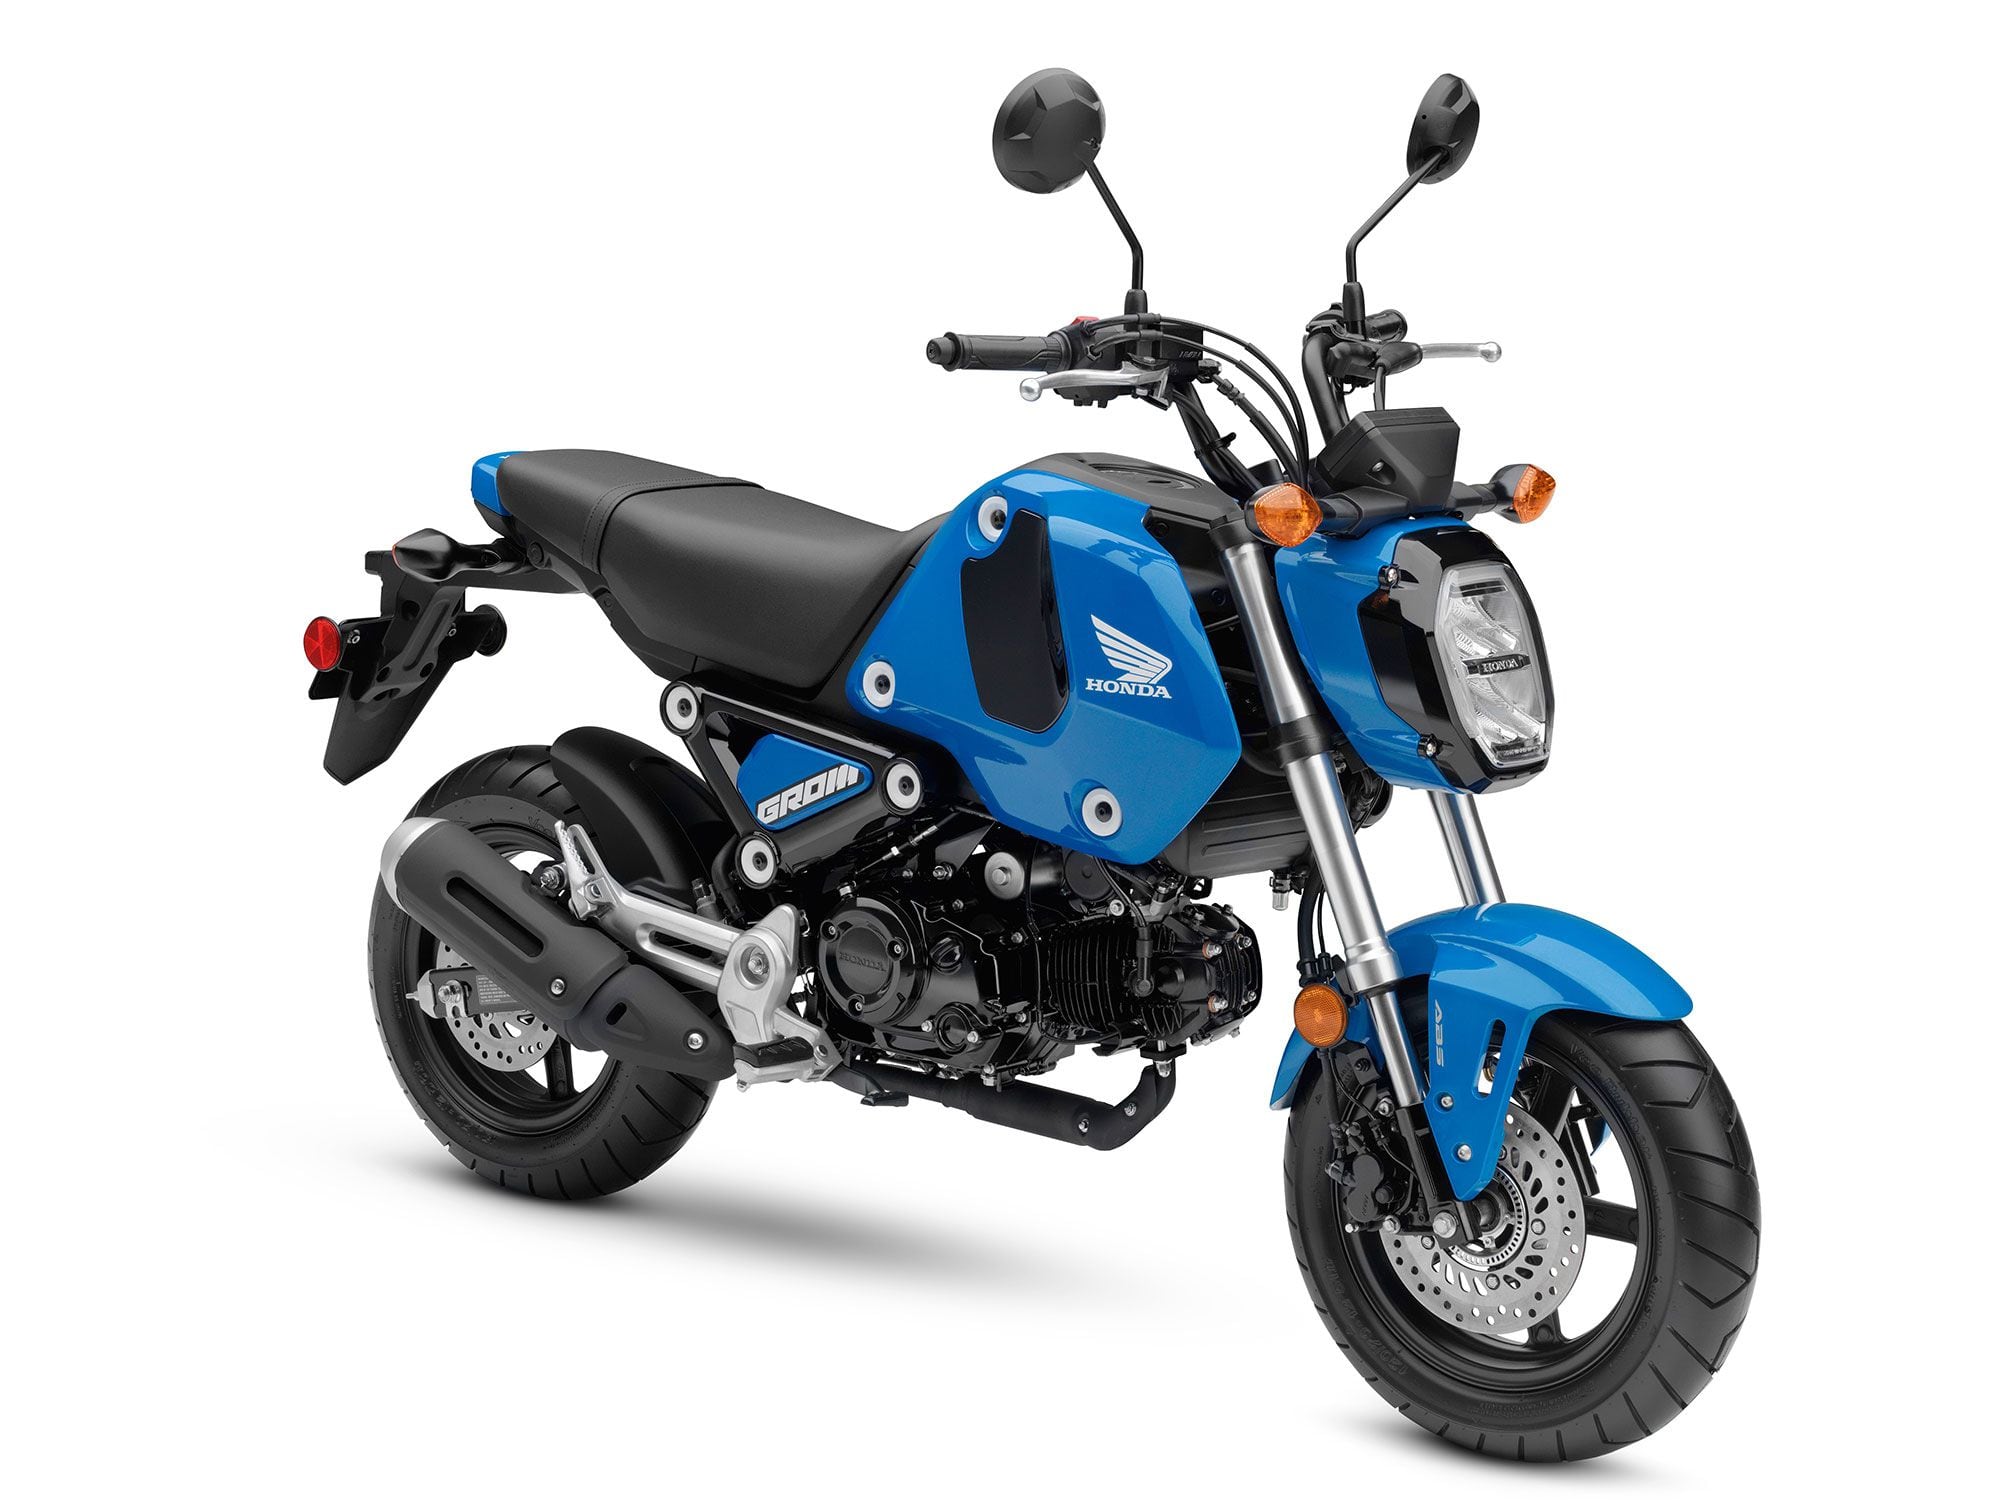 The 2022 Honda Grom ABS in Candy Blue colorway.